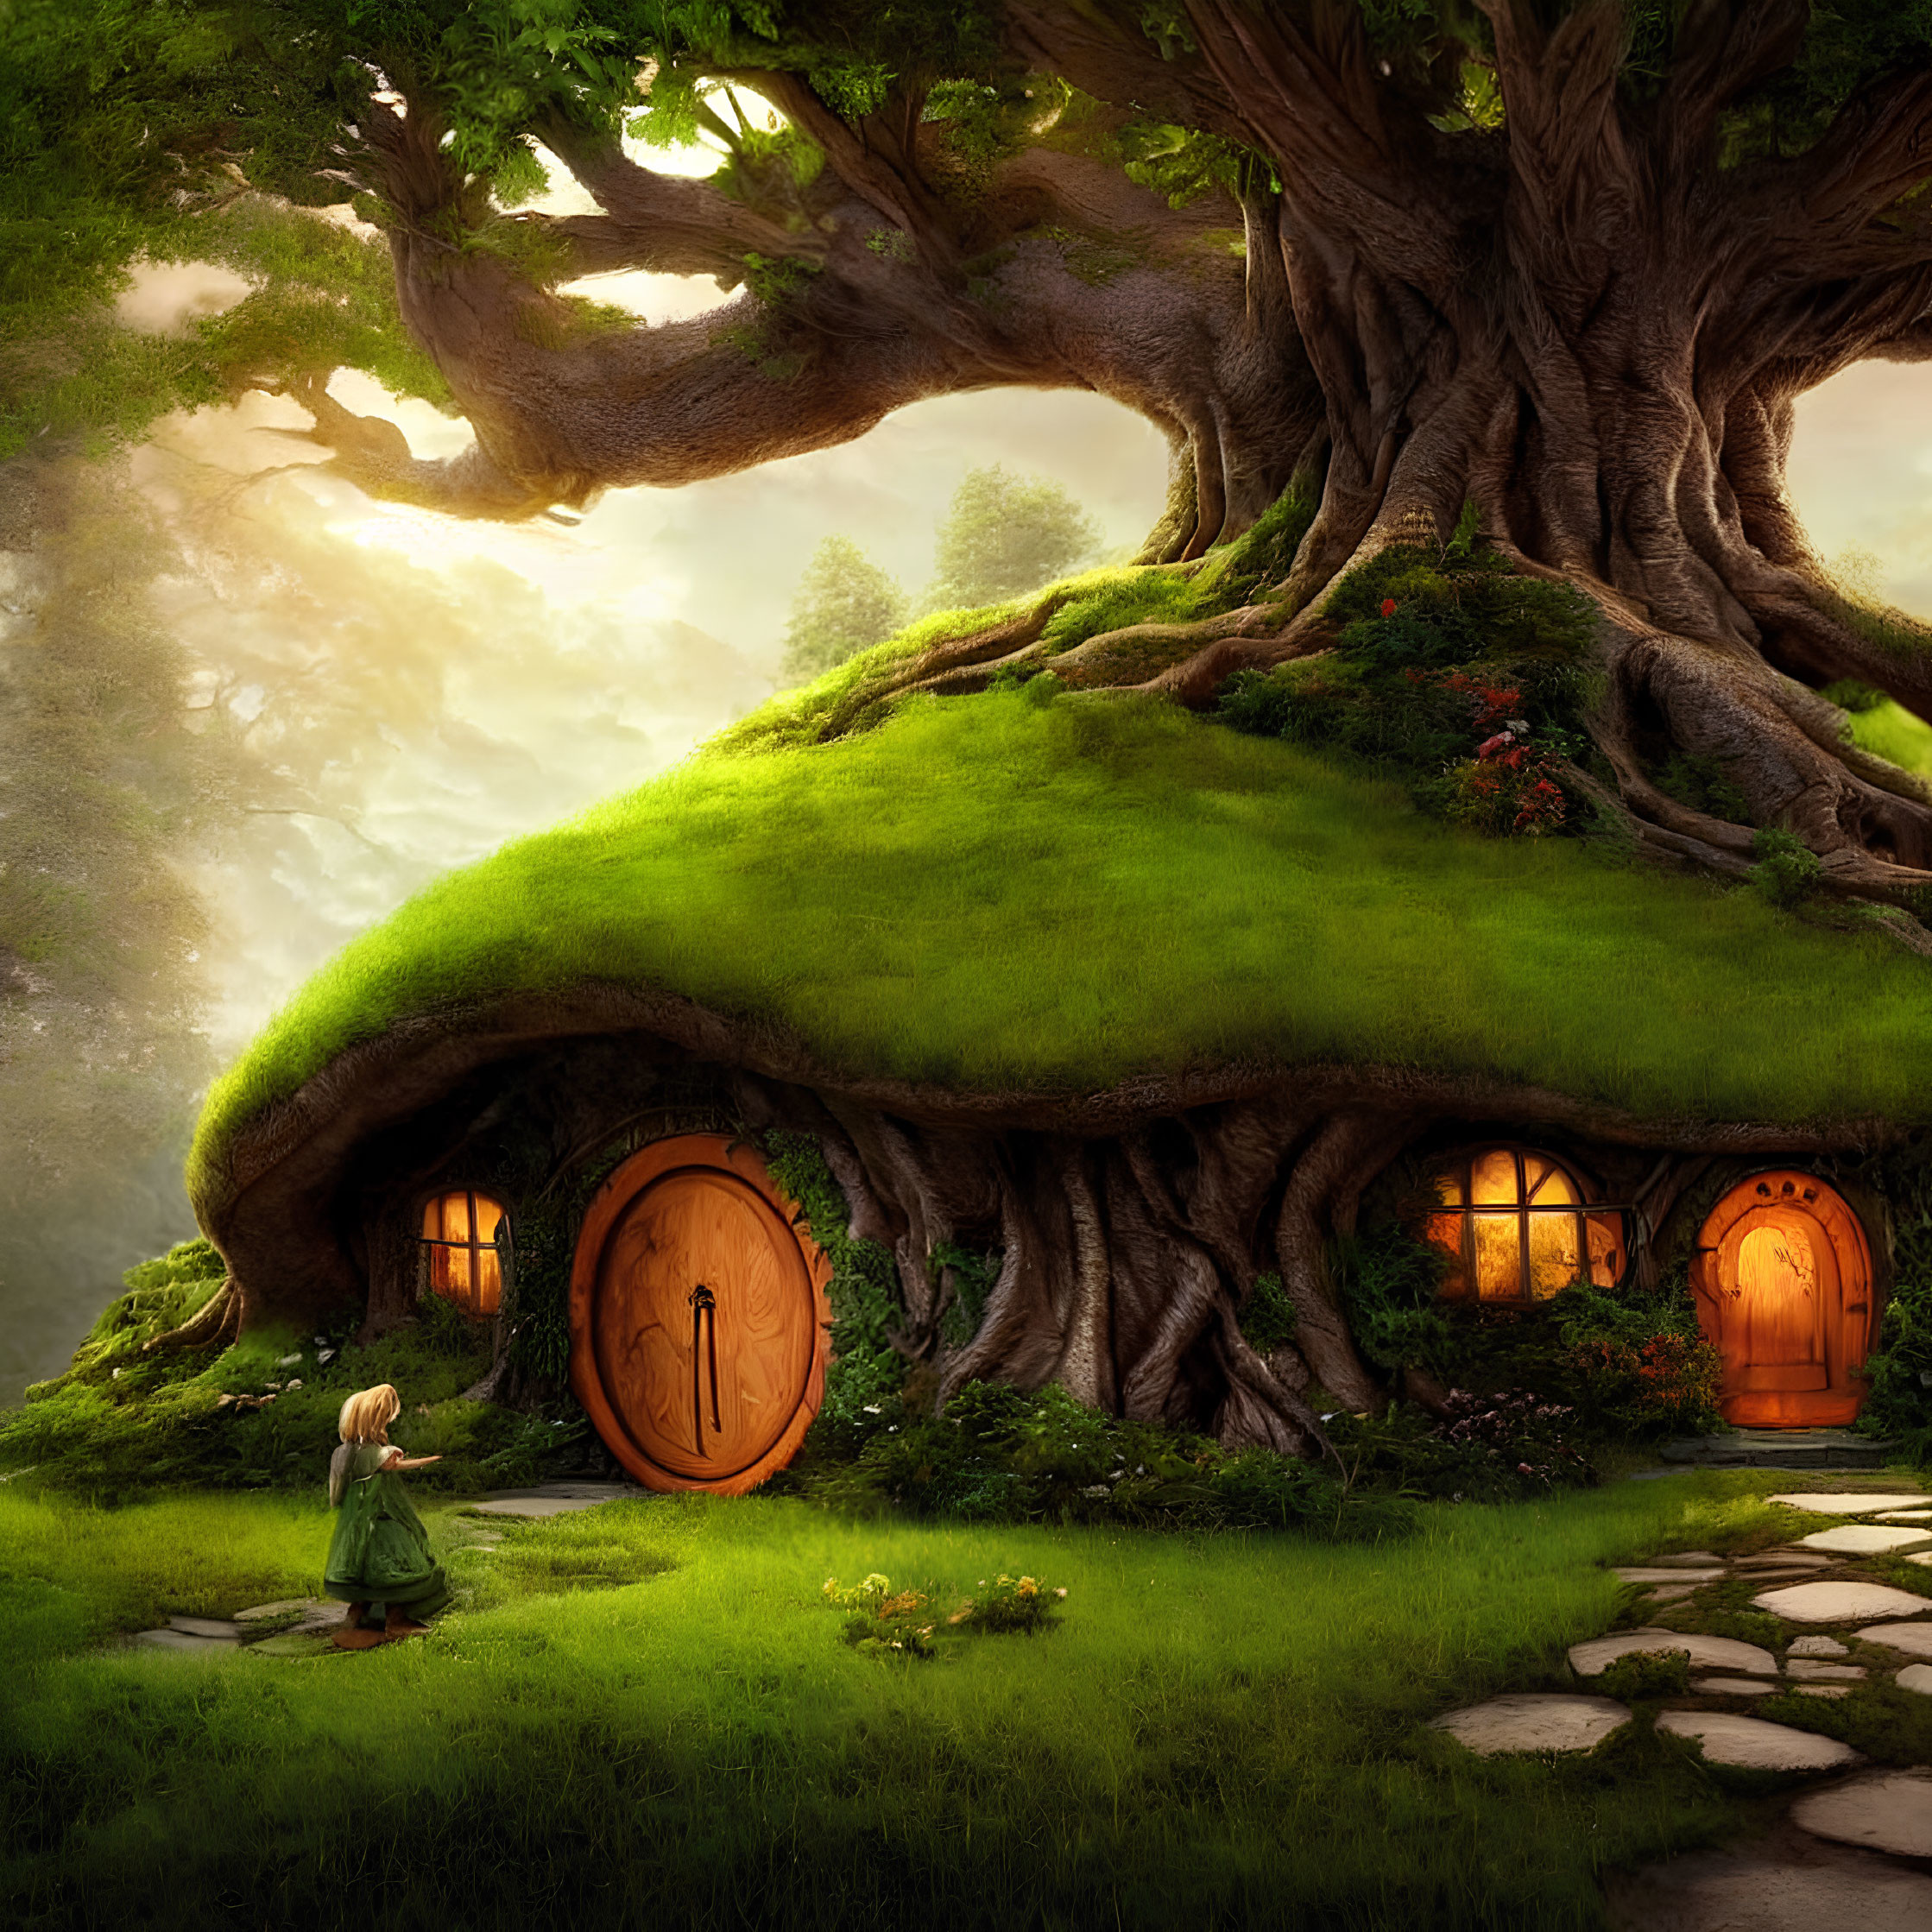 Child exploring magical tree with hobbit-like house in whimsical illustration